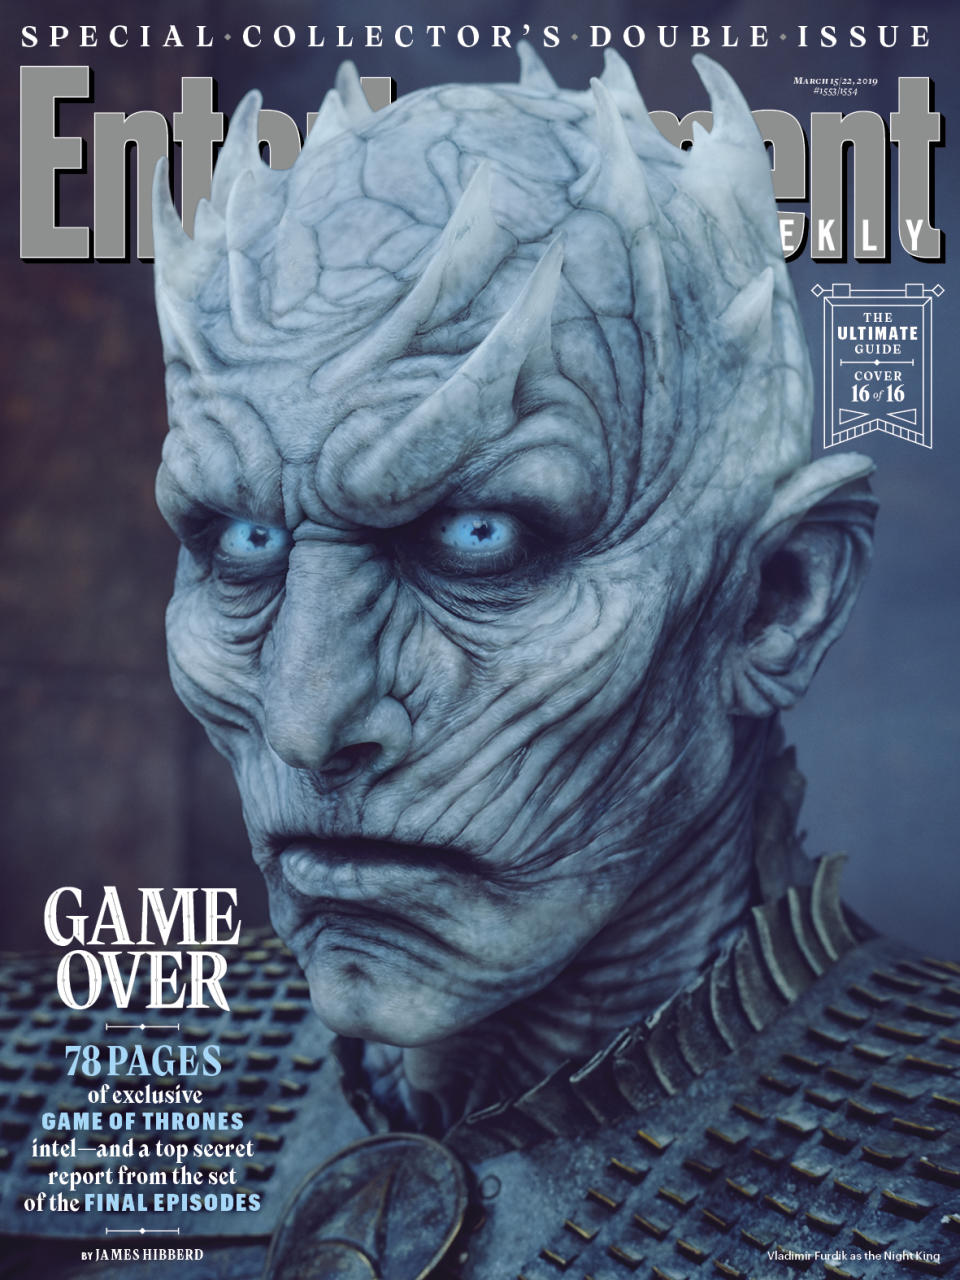 The Night King (Photo: Marc Hom for EW)